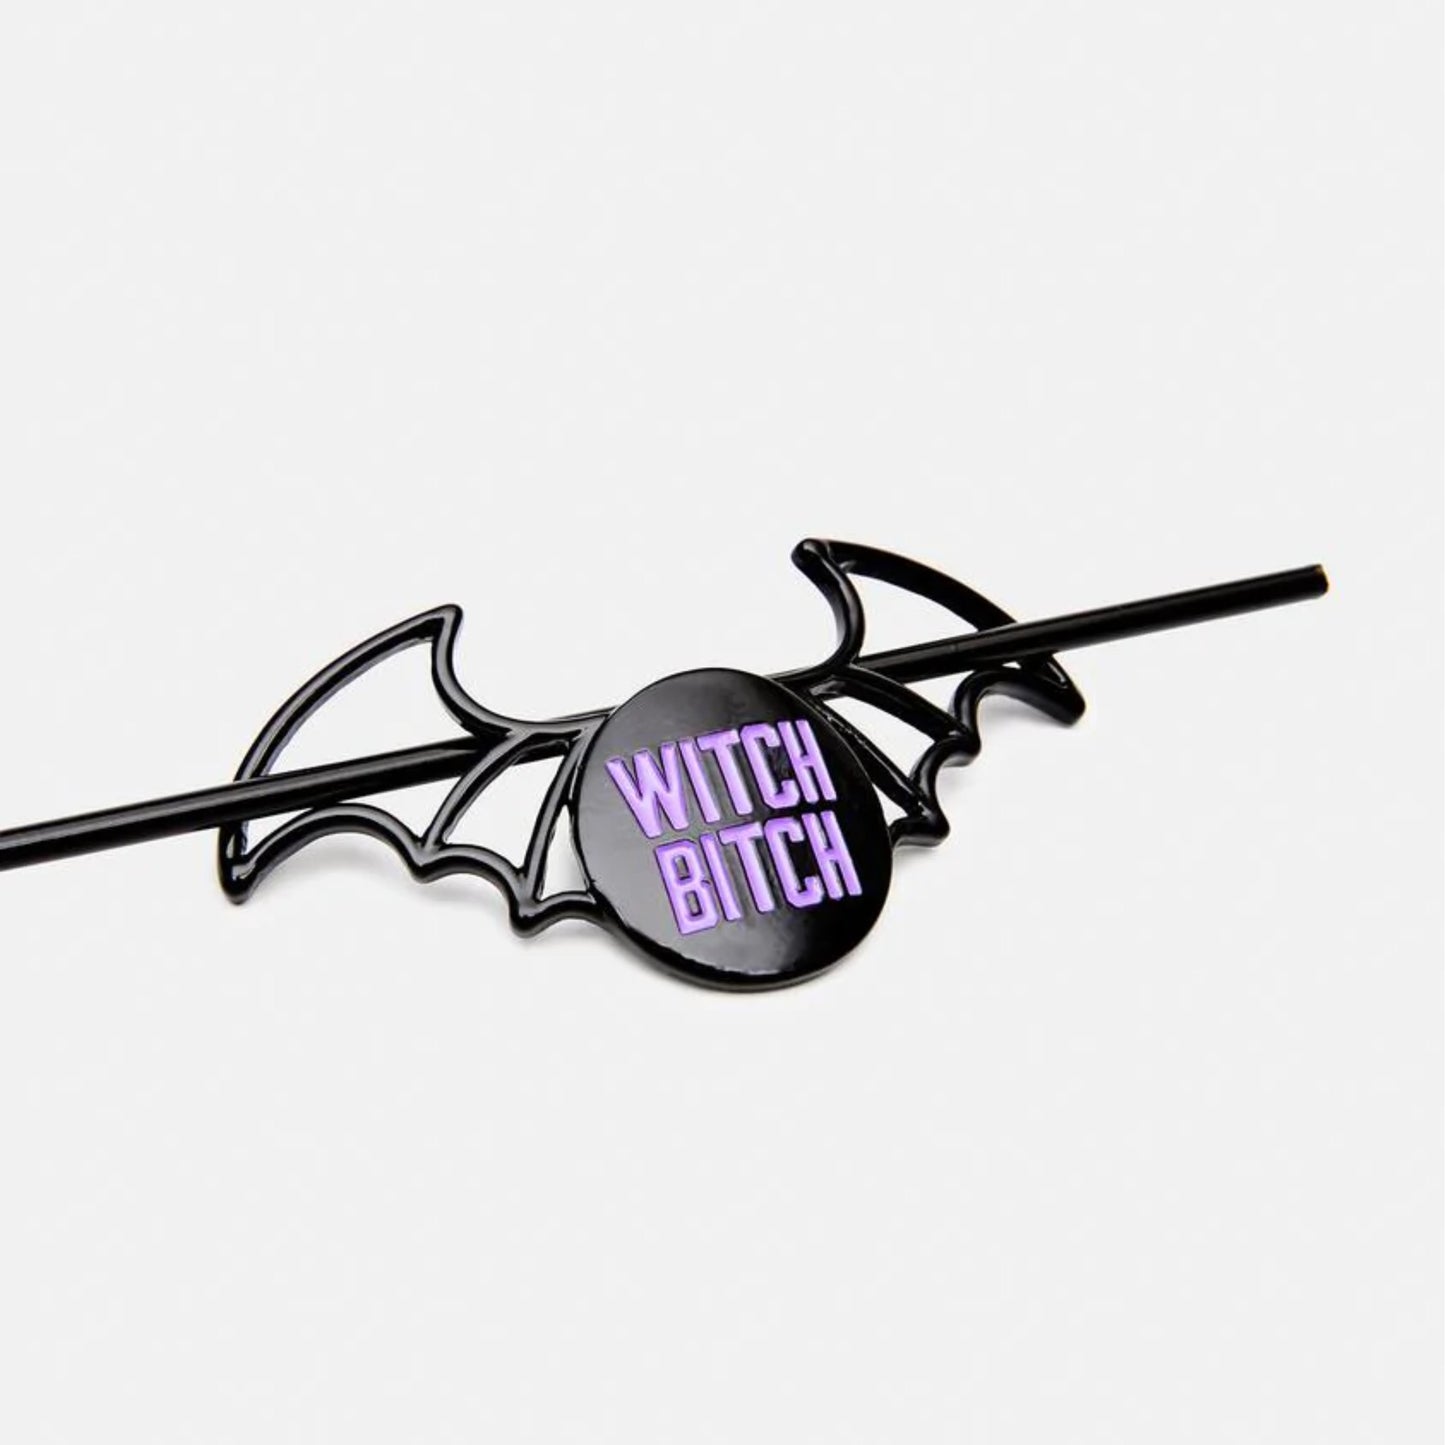 Witch Bitch Hair Pin | Black Bat Shape With "Witch Bitch" Printed on Top - Dolls Kill - Hair Pin